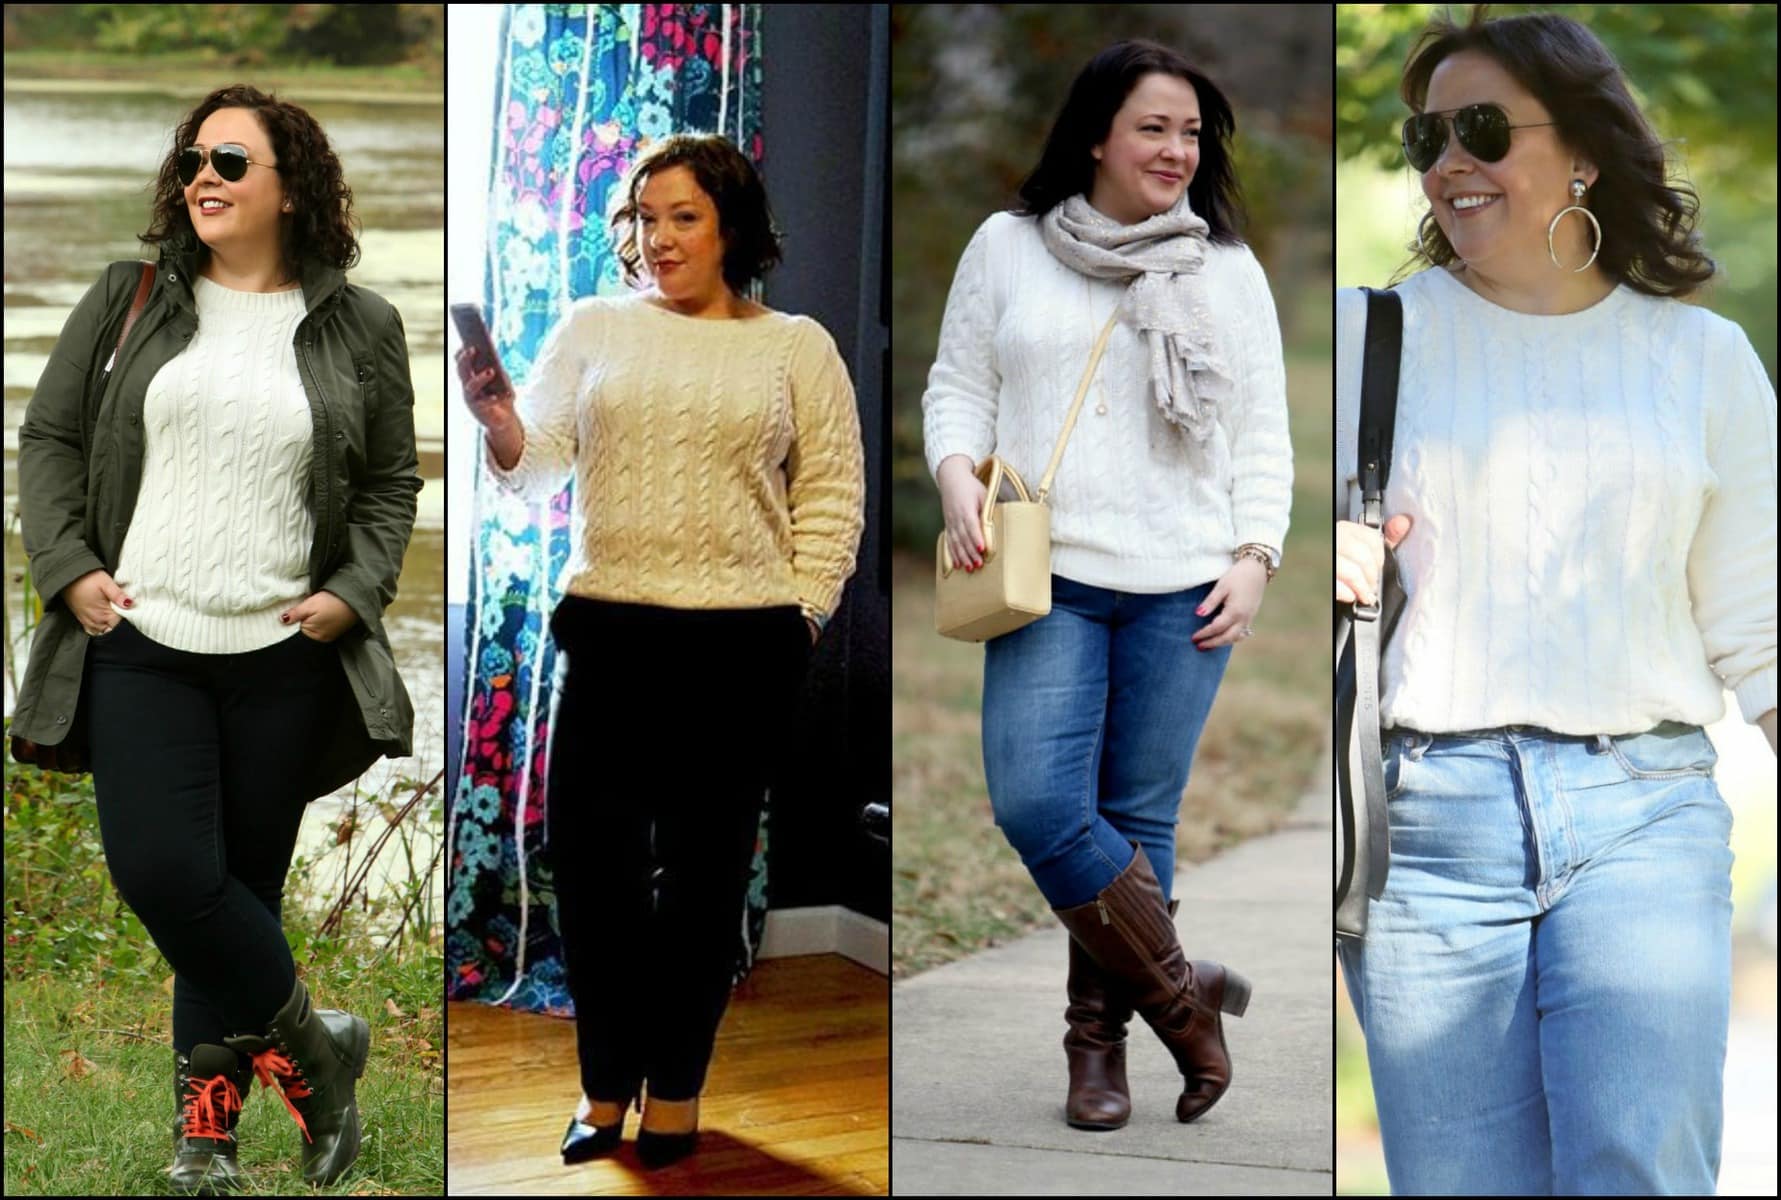 the versatility of an ivory cotton cablenknit sweater